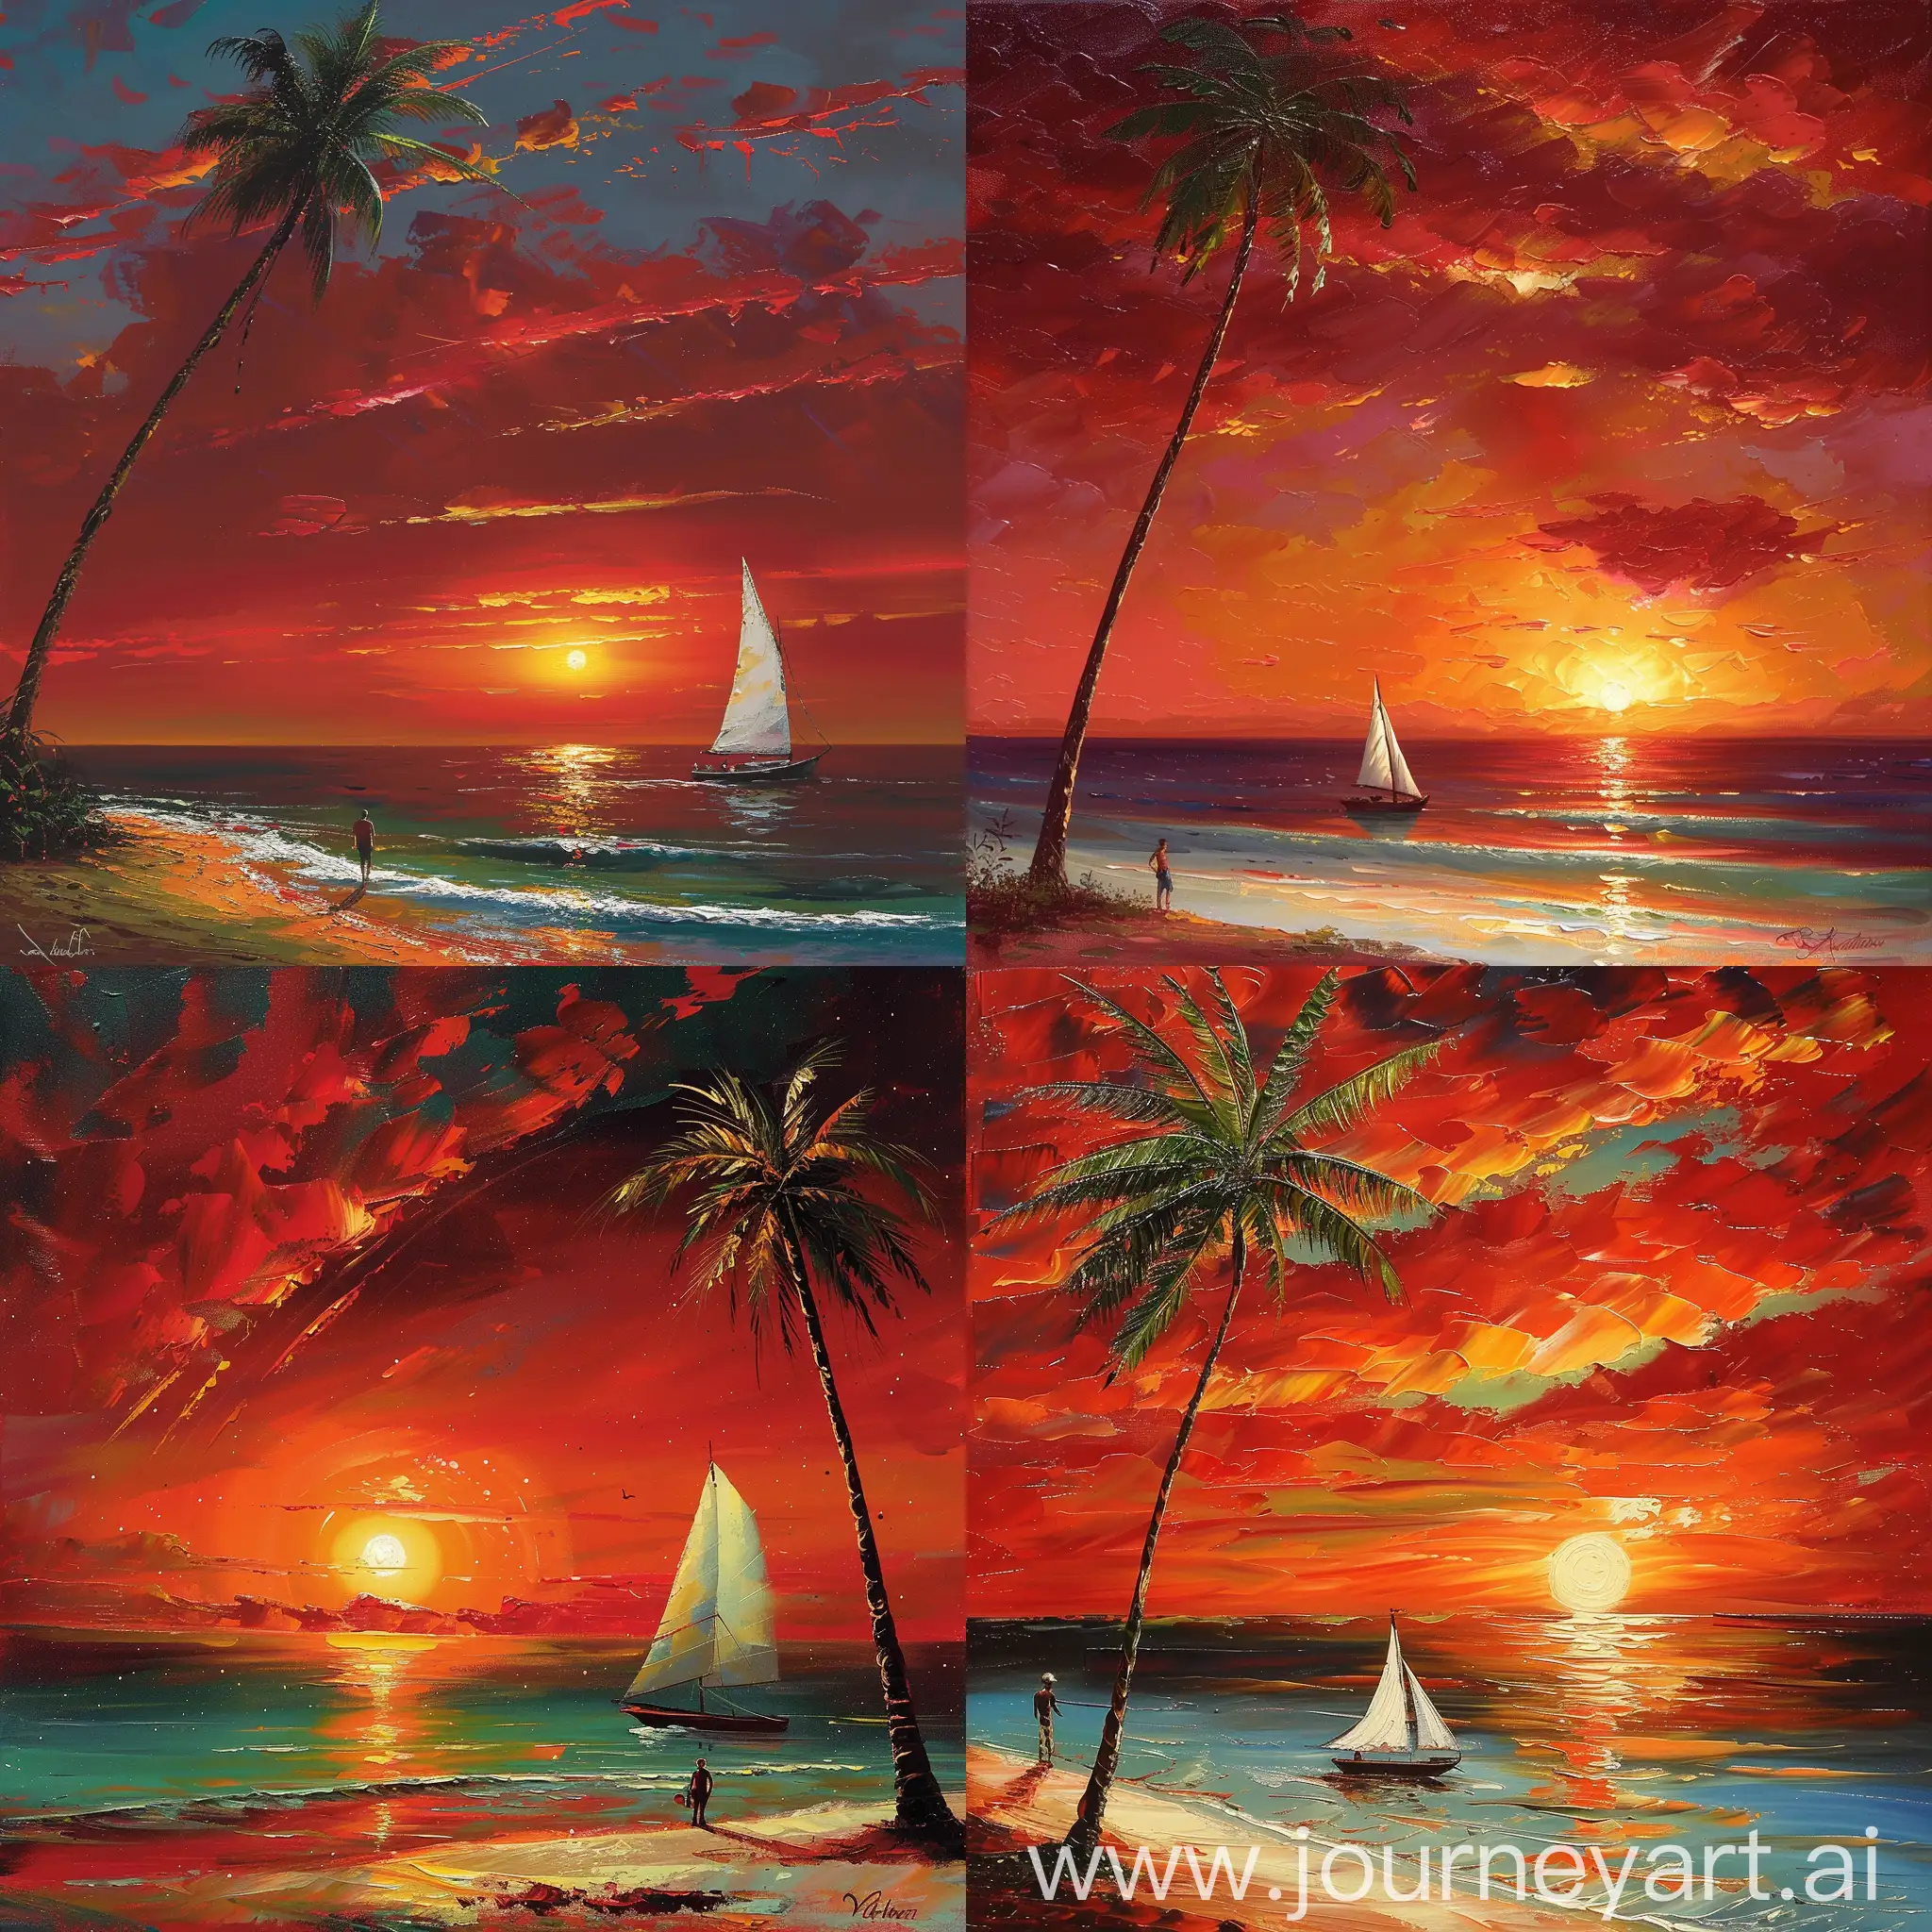 make image, a painting that captures the essence of a tranquil beach scene at sunset. It features: A sky ablaze with vibrant red and orange hues, suggesting the time of day is evening. The sun setting on the horizon, its brightness radiating across the sky. A lone figure standing on the shore, possibly reflecting on the day or enjoying the peaceful scenery. A small sailboat with a white sail, drifting on the calm sea waters, adding a sense of serenity to the scene. A tall palm tree leaning towards the ocean, contributing to the tropical feel of the artwork.